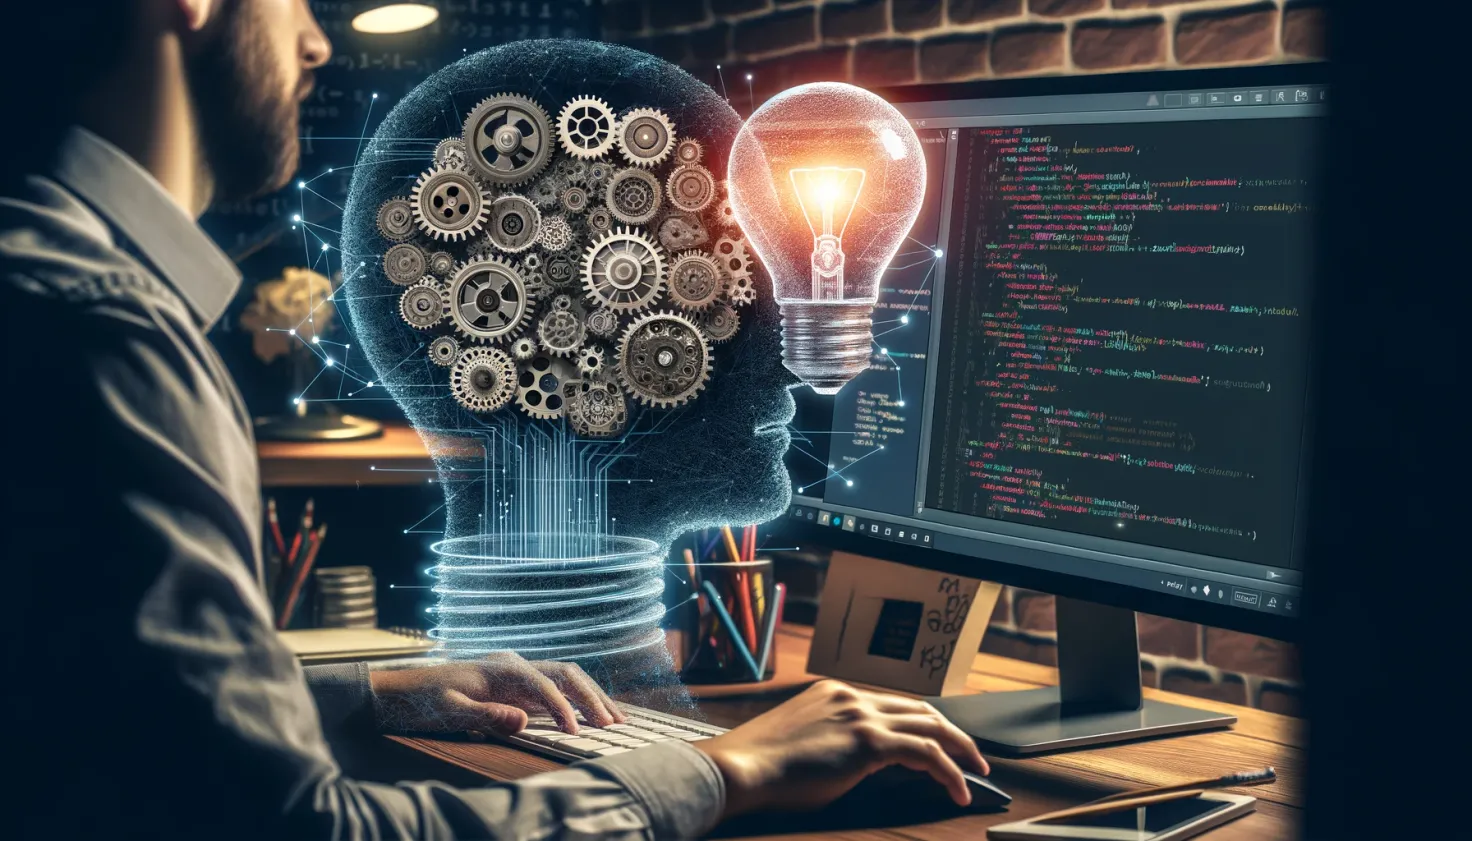 growth mindset concept, brain with gears, developer at work, code on computer screen, light bulb idea symbol